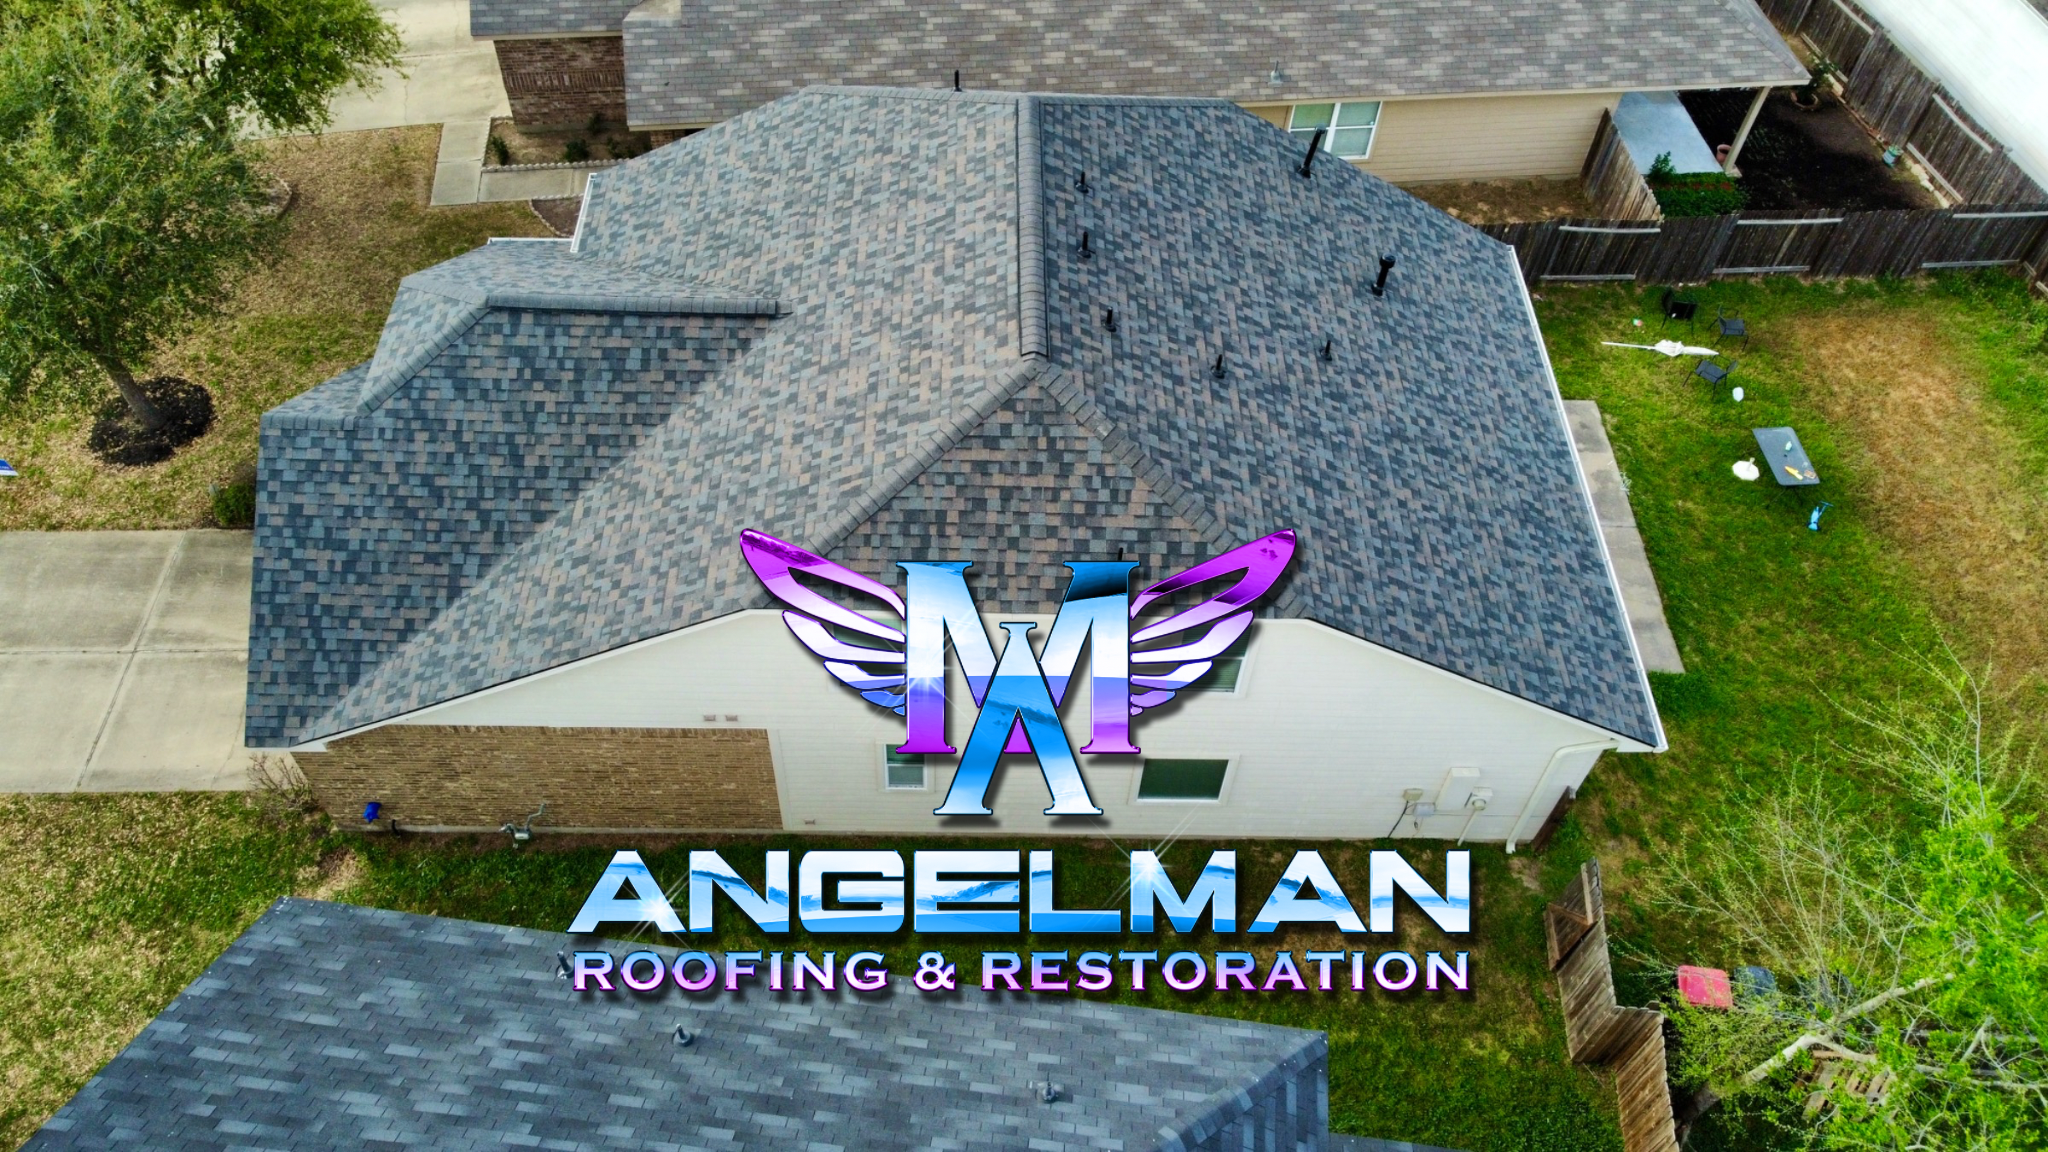 Angelman roofing and restoration finishing work